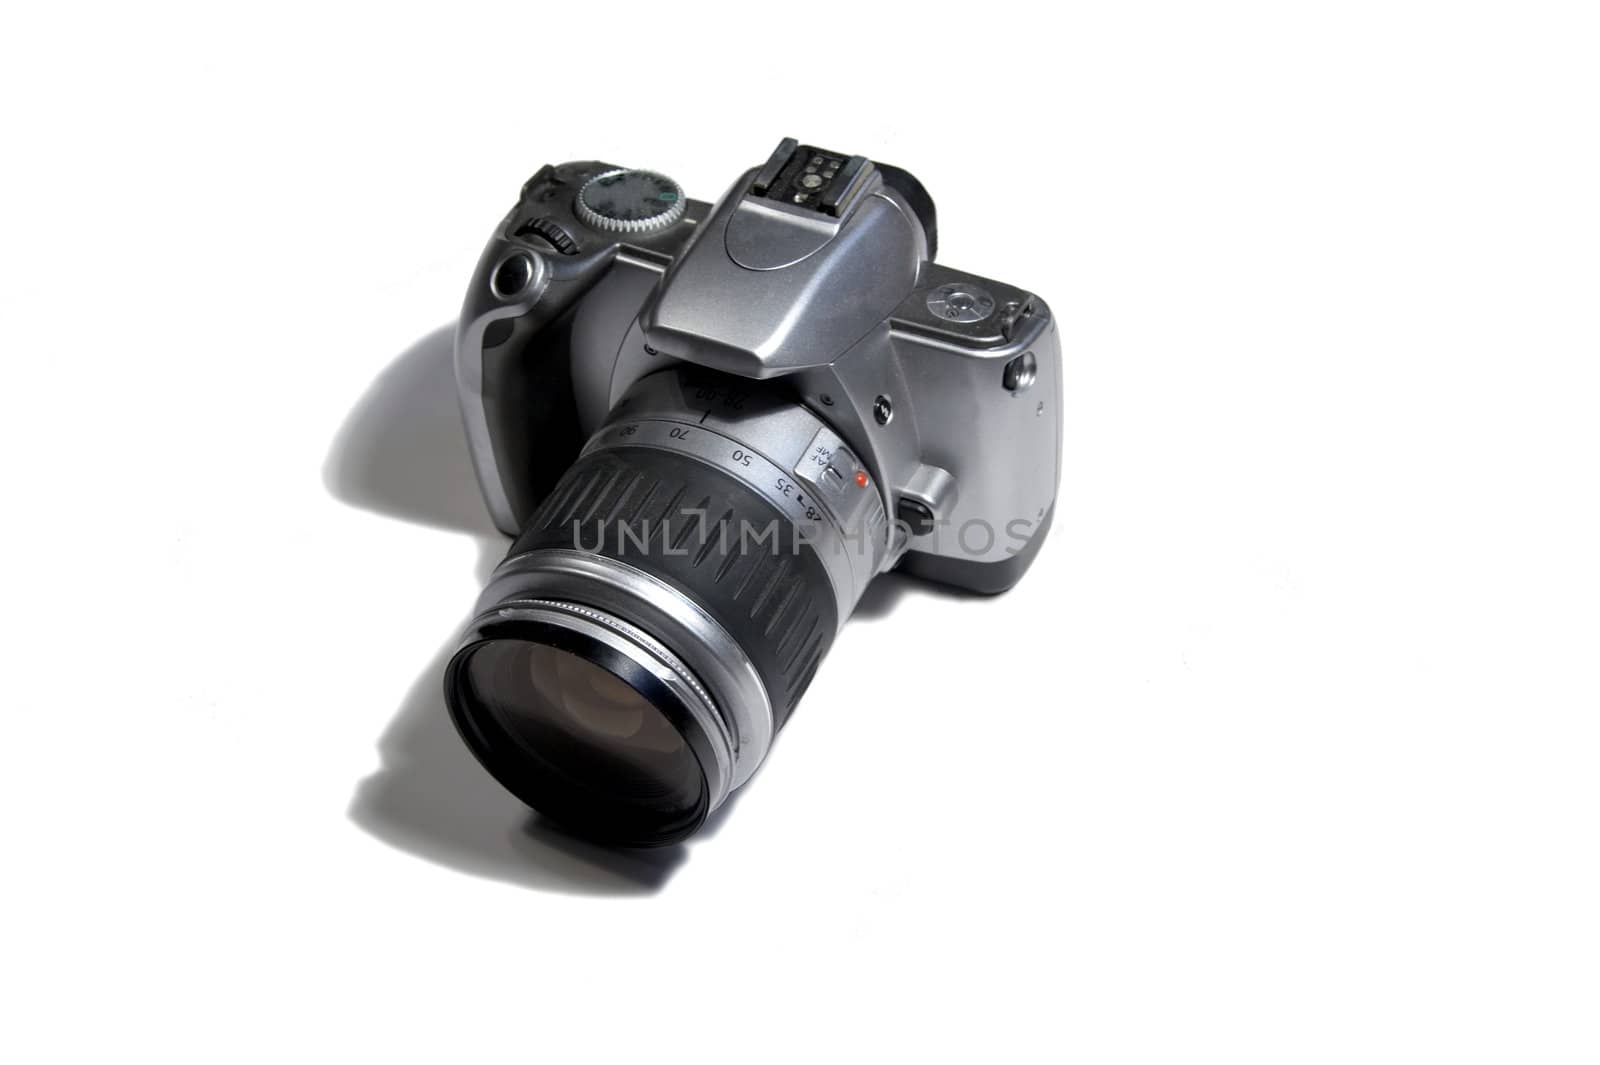 Silver SLR photo camera, by canon EOS system